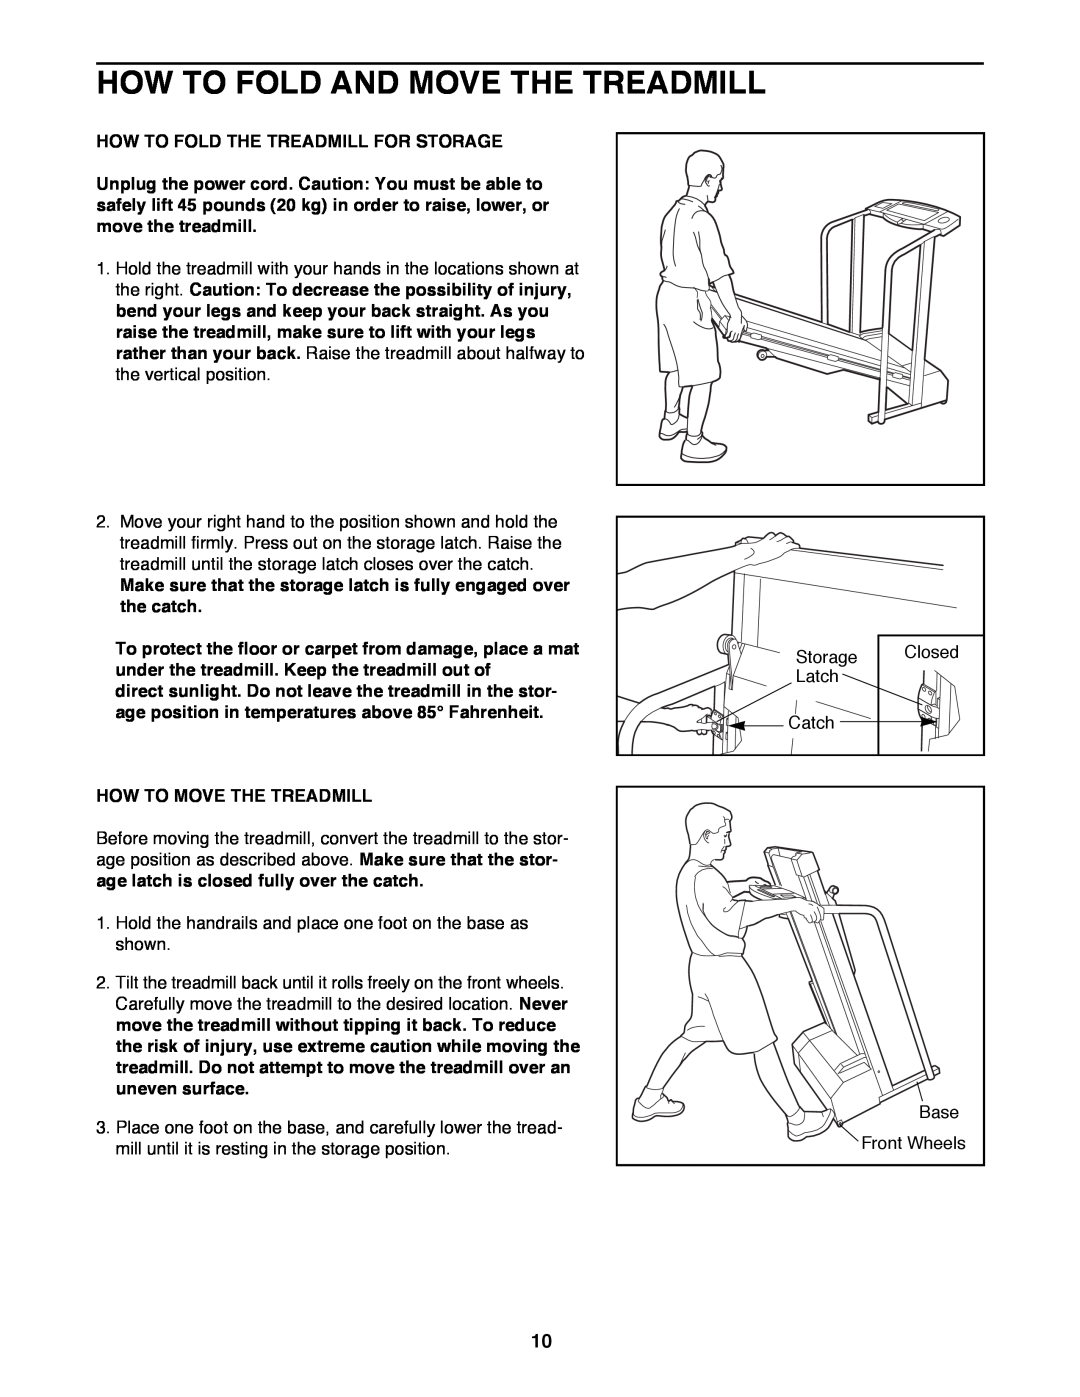 ProForm PFTL39191 How To Fold And Move The Treadmill, How To Fold The Treadmill For Storage, How To Move The Treadmill 